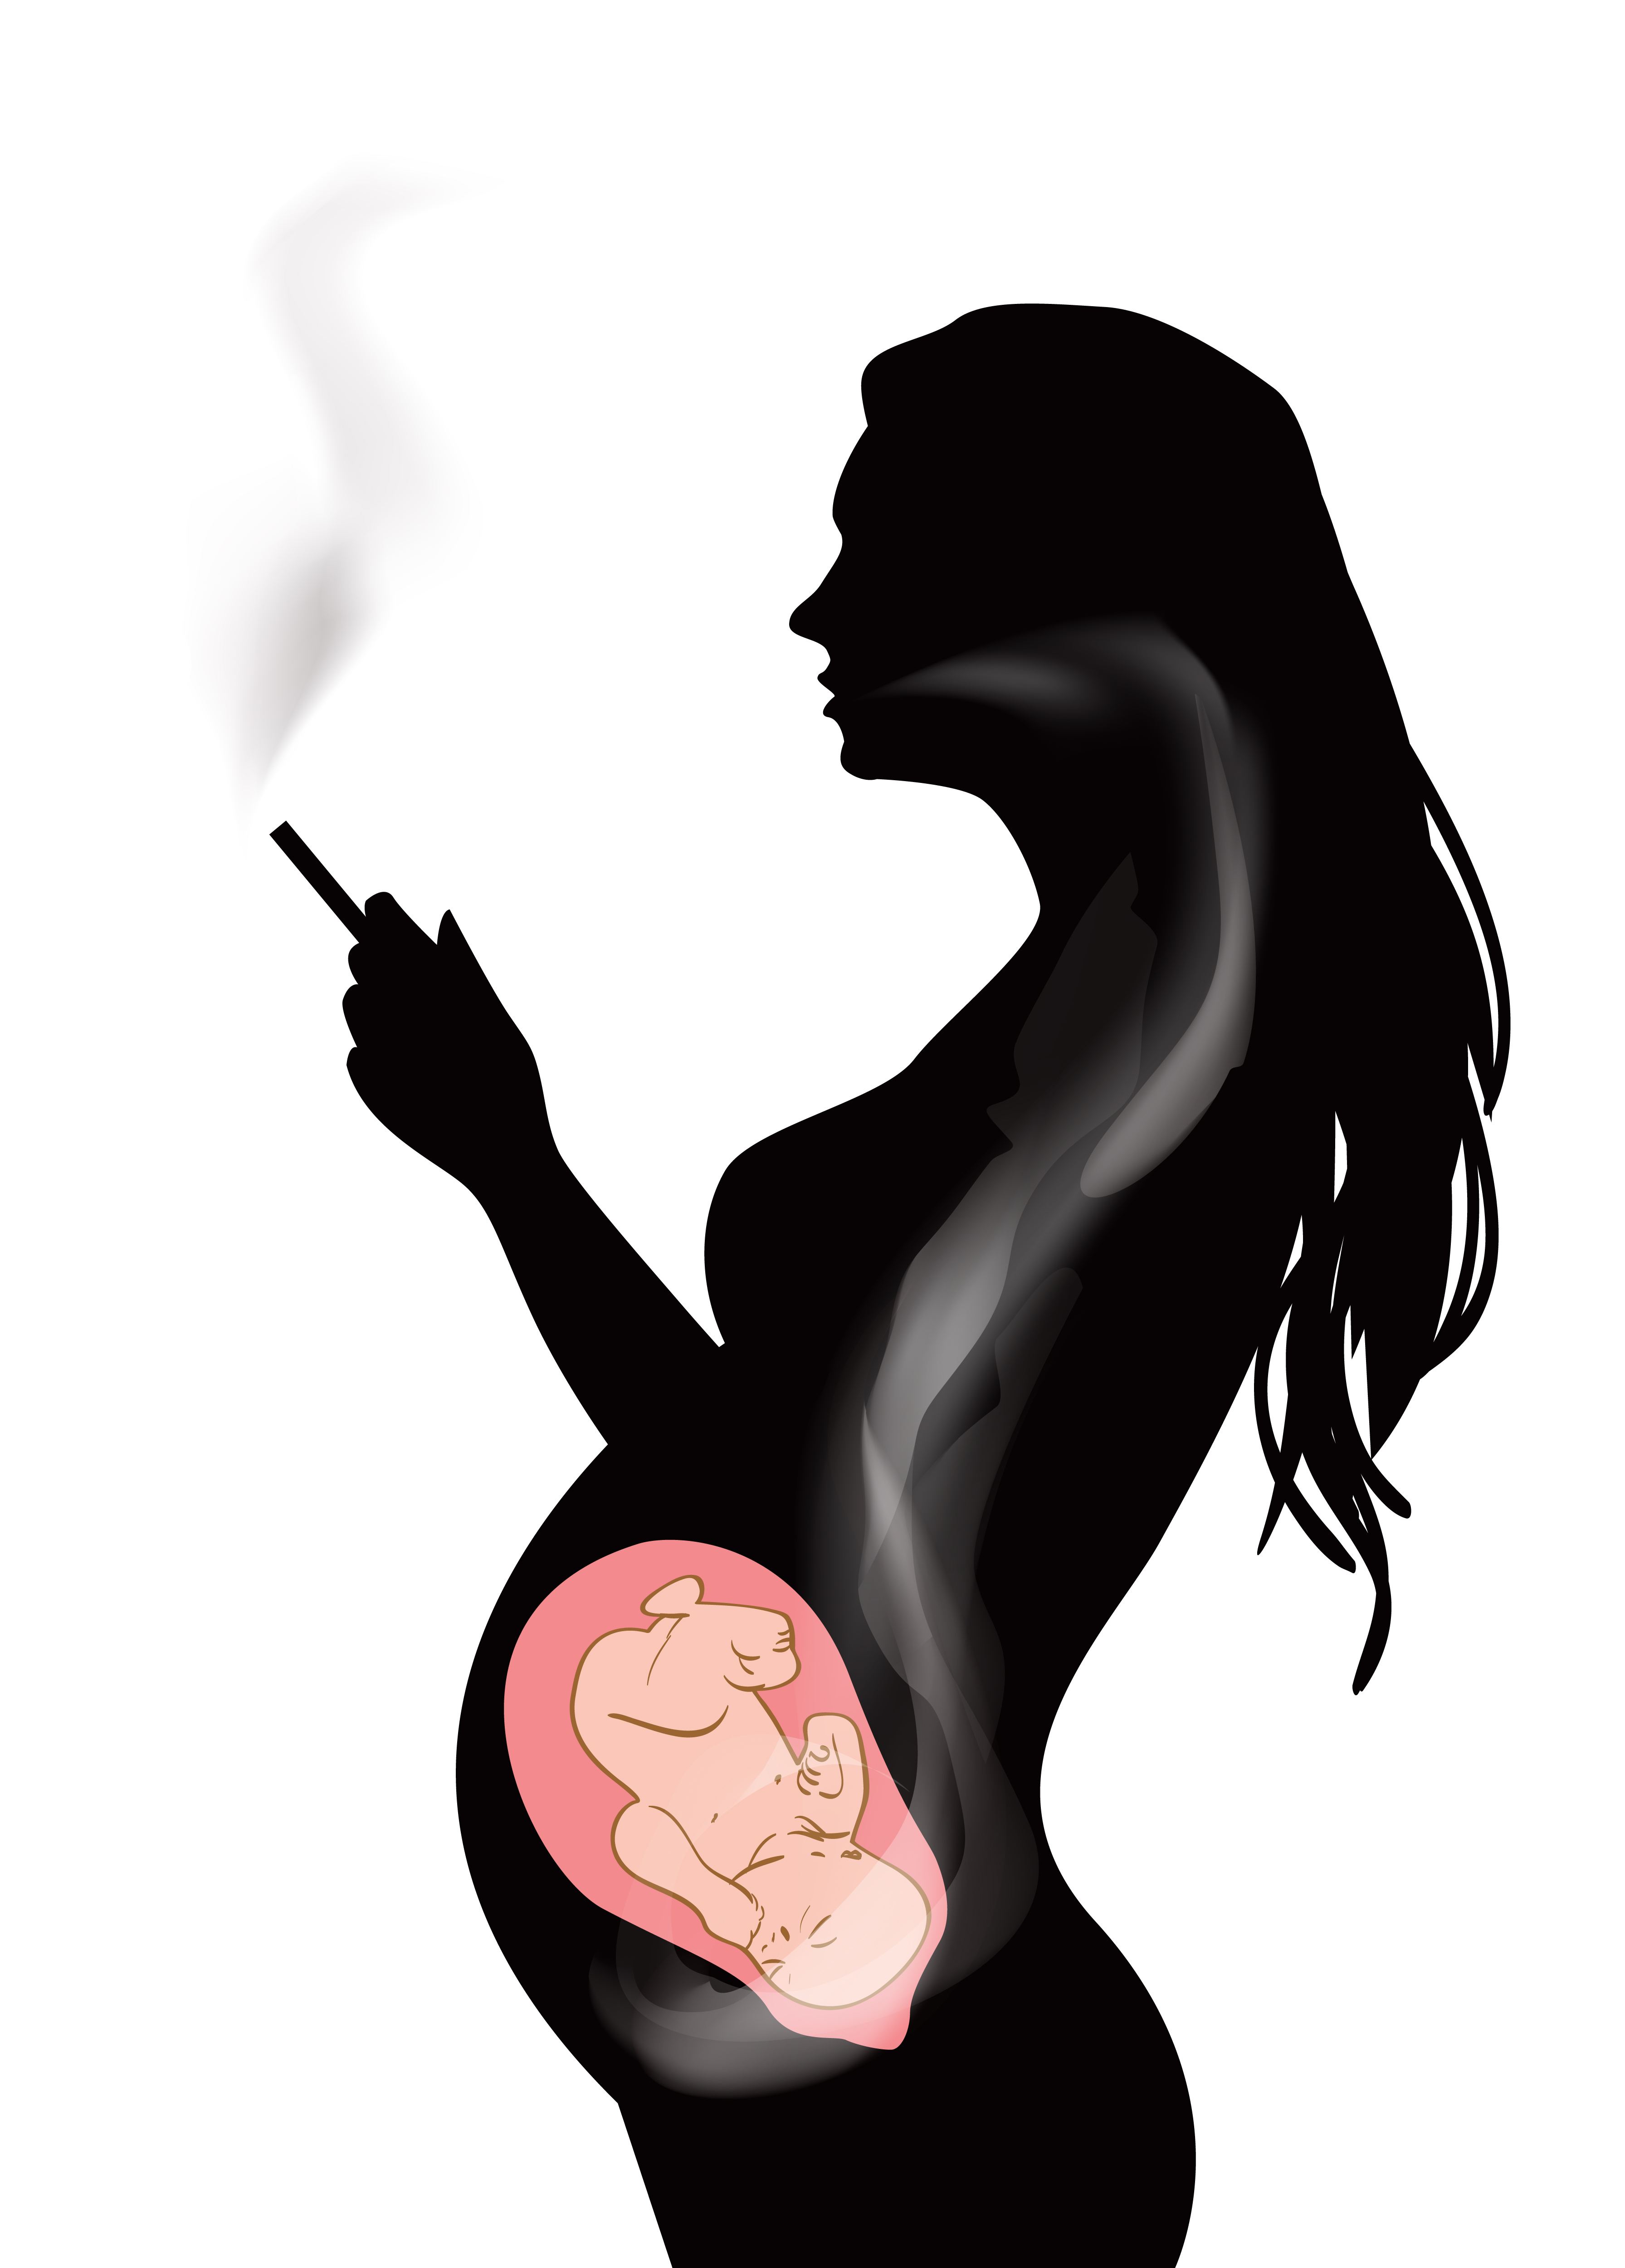 Can U Smoke Hookah While Pregnant: Risks and Considerations